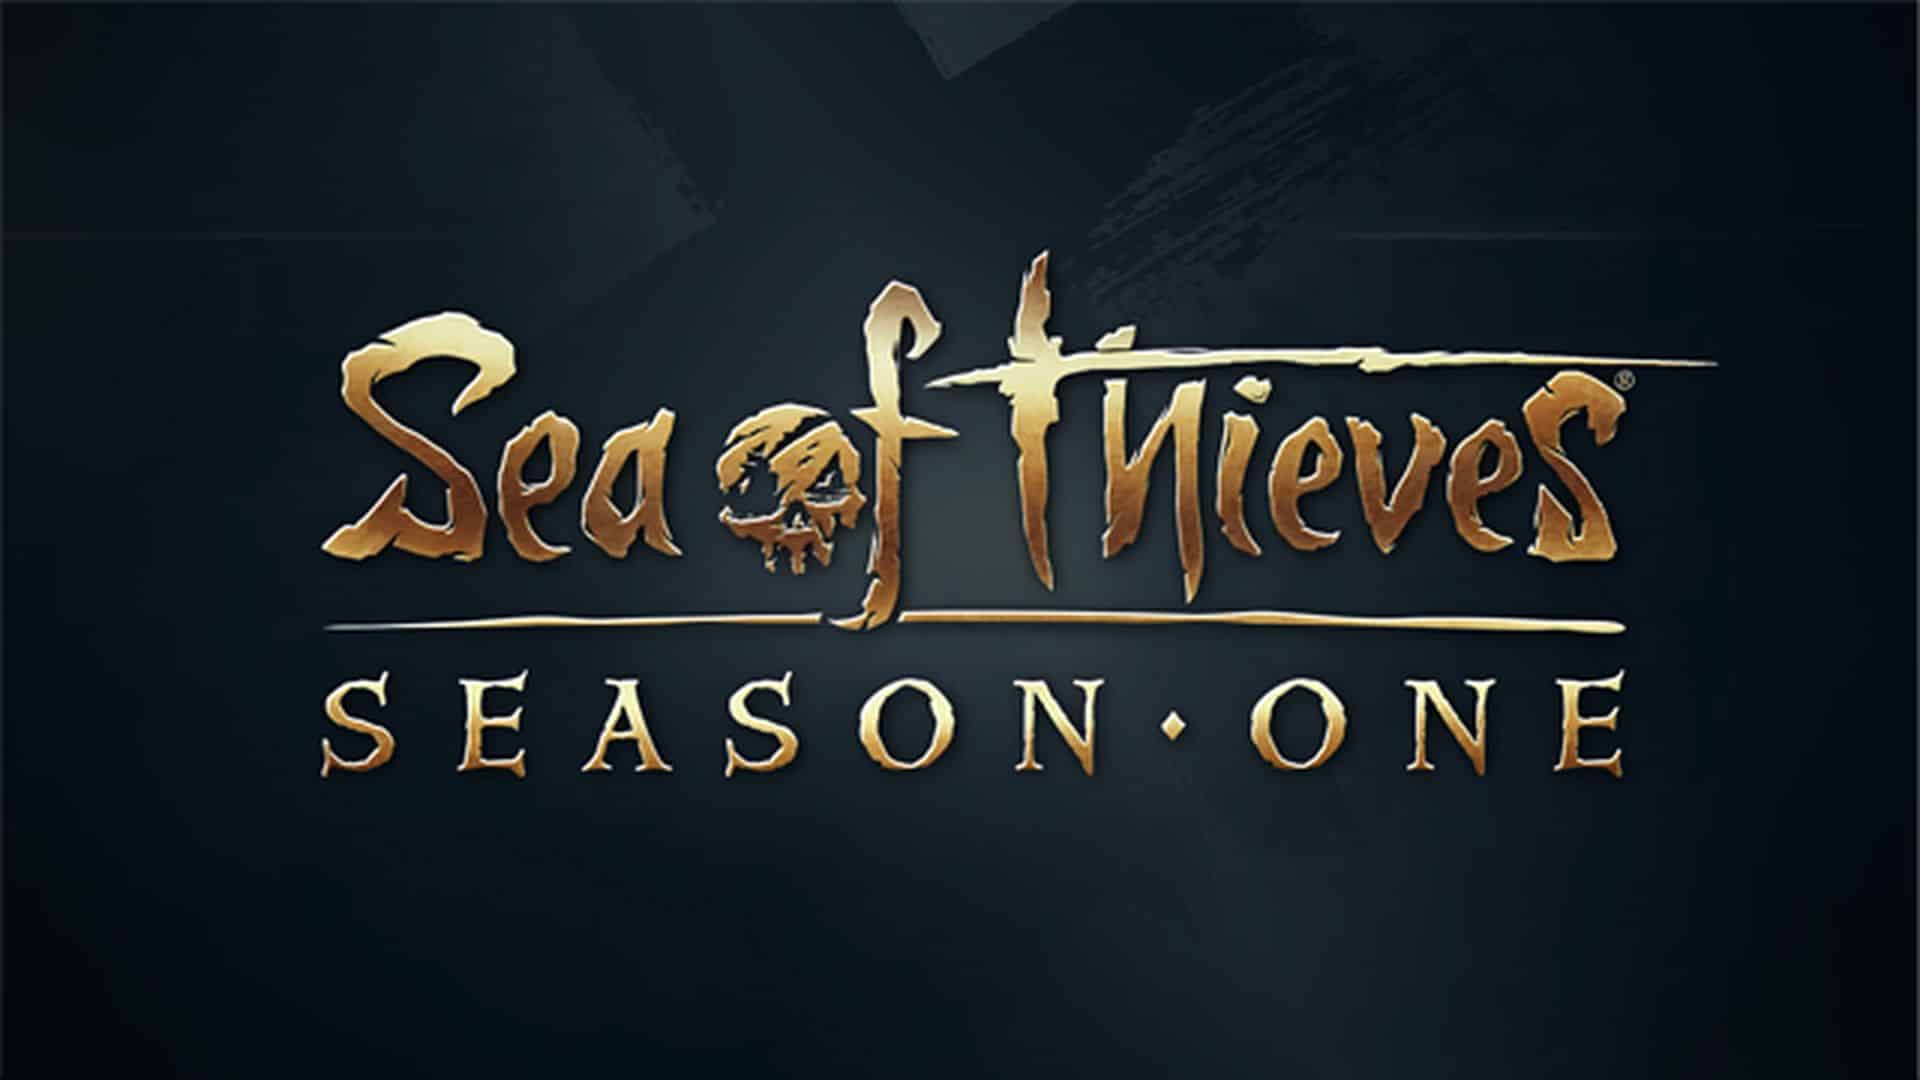 Sea of Thieves Stagione 1